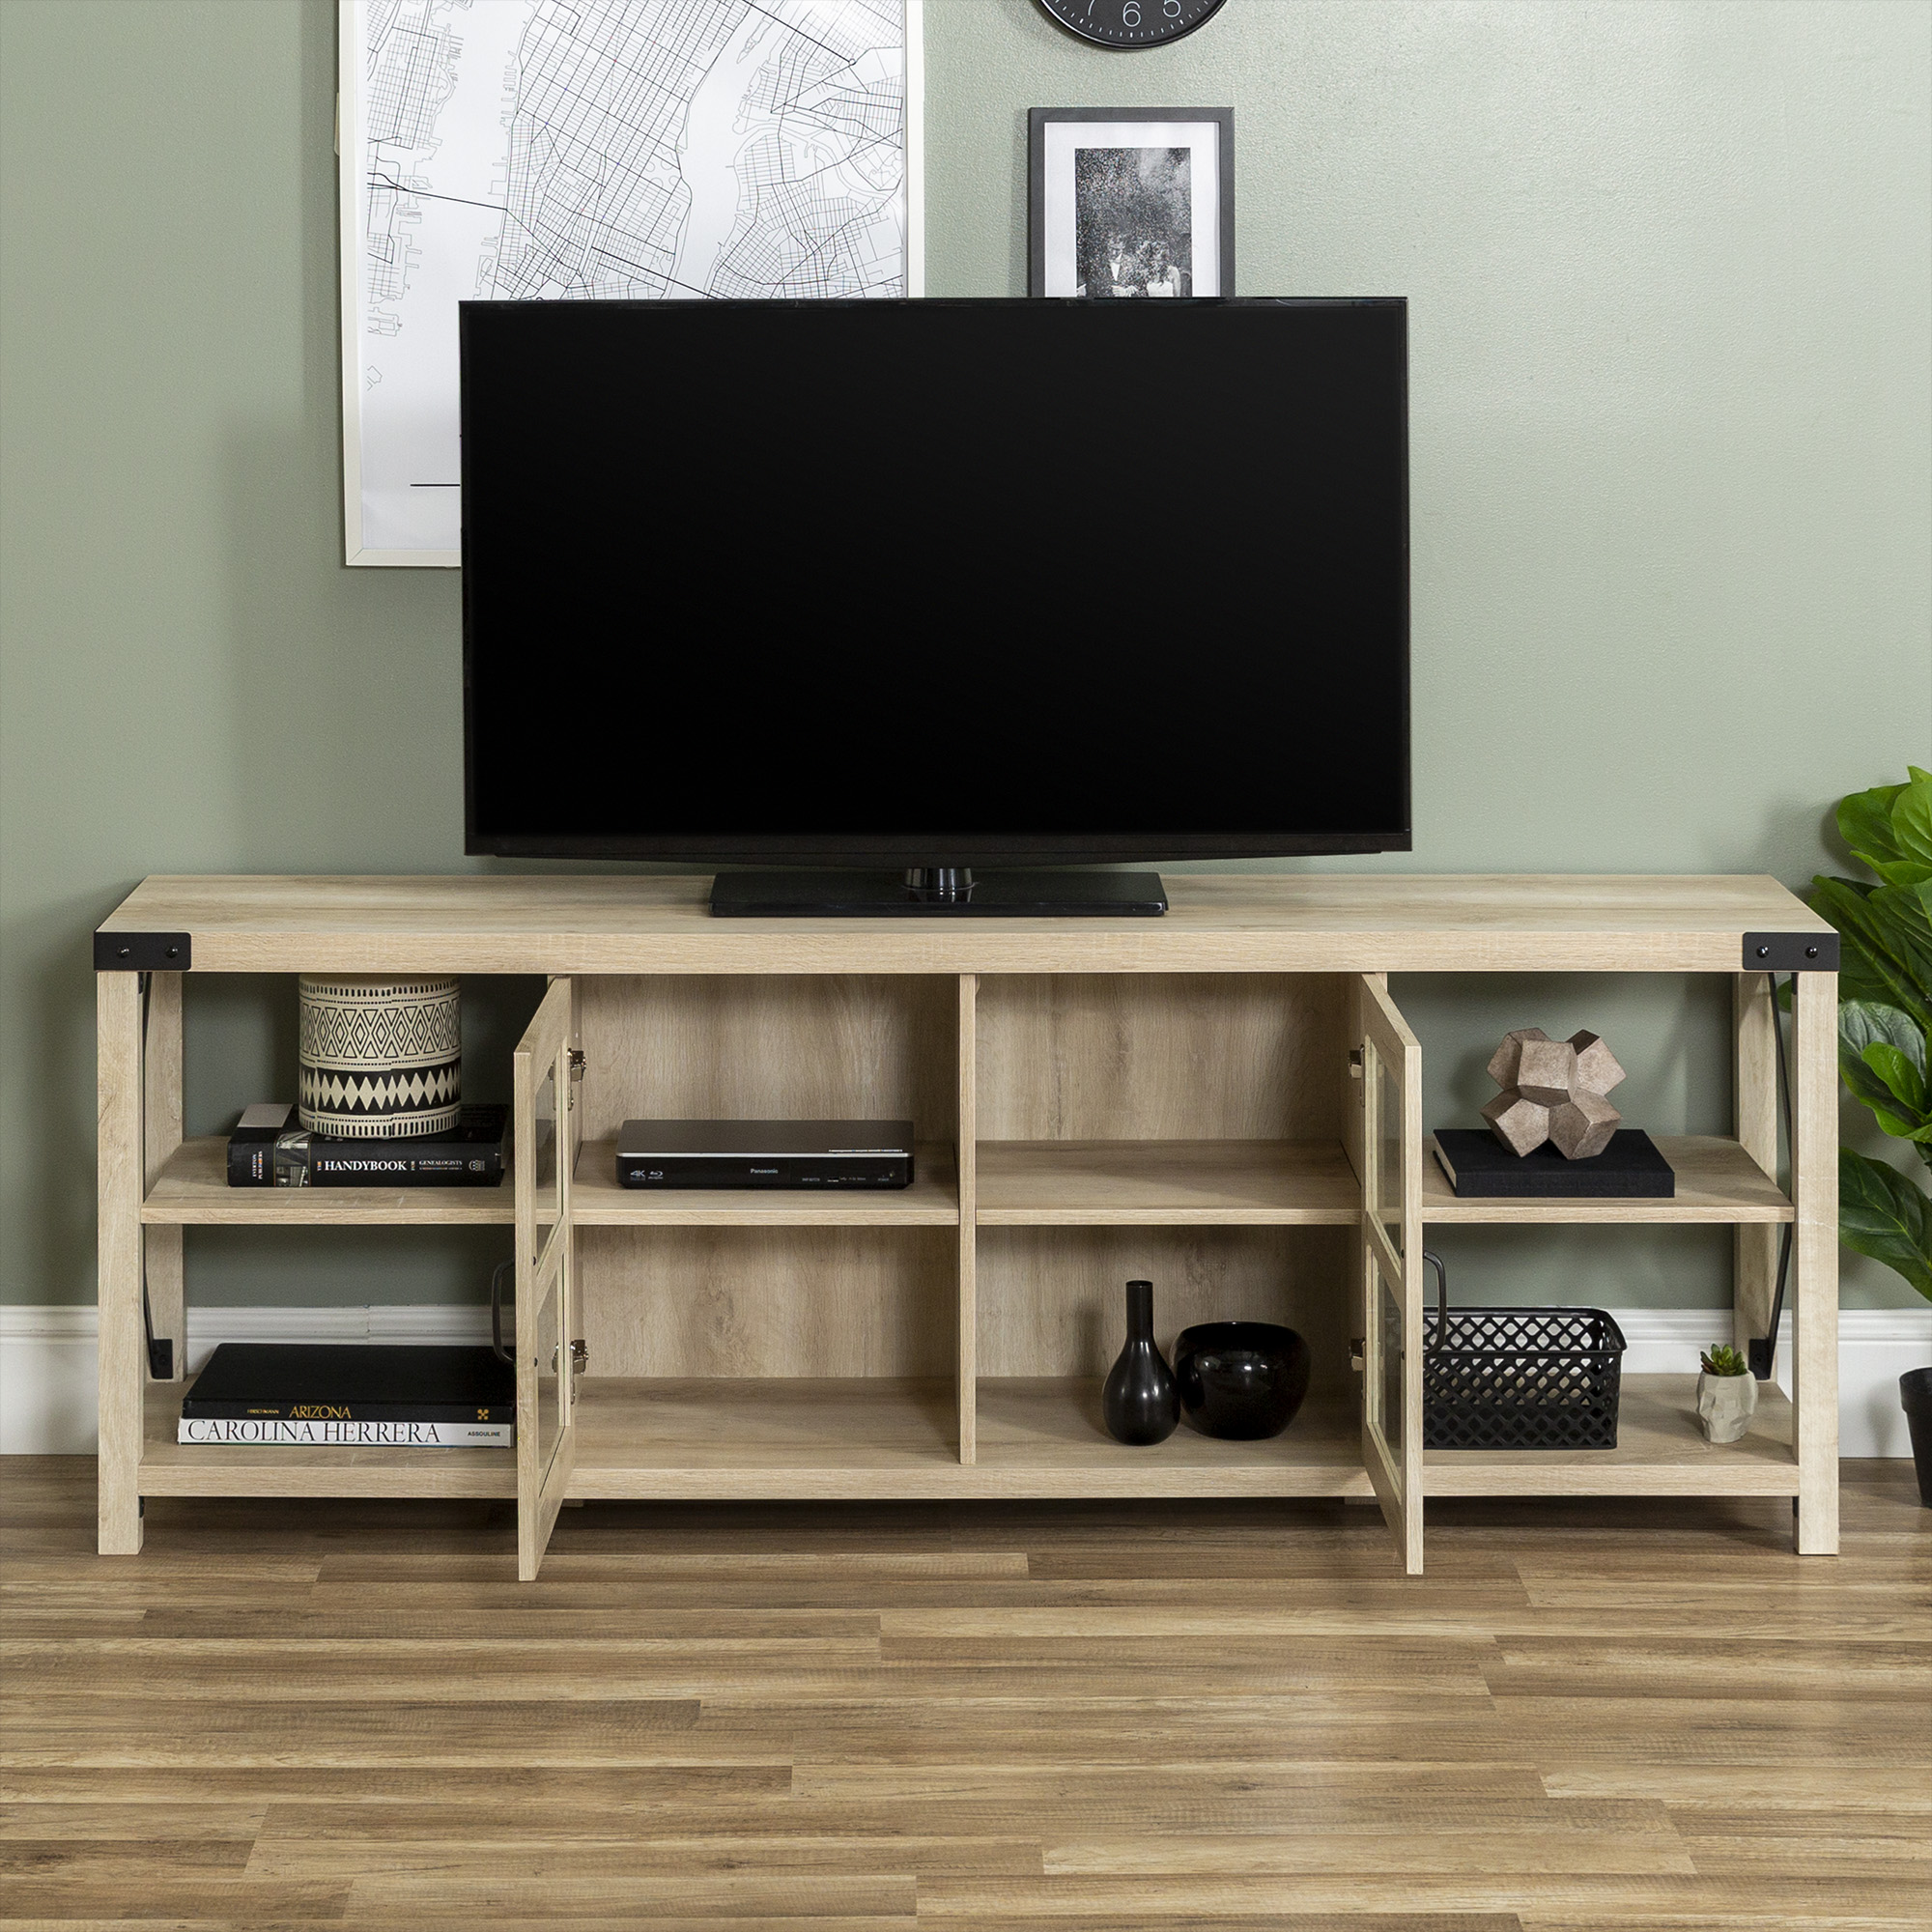 Woven Paths Farmhouse 2-Door Metal X TV Stand for TVs up to 80", White Oak - image 3 of 13